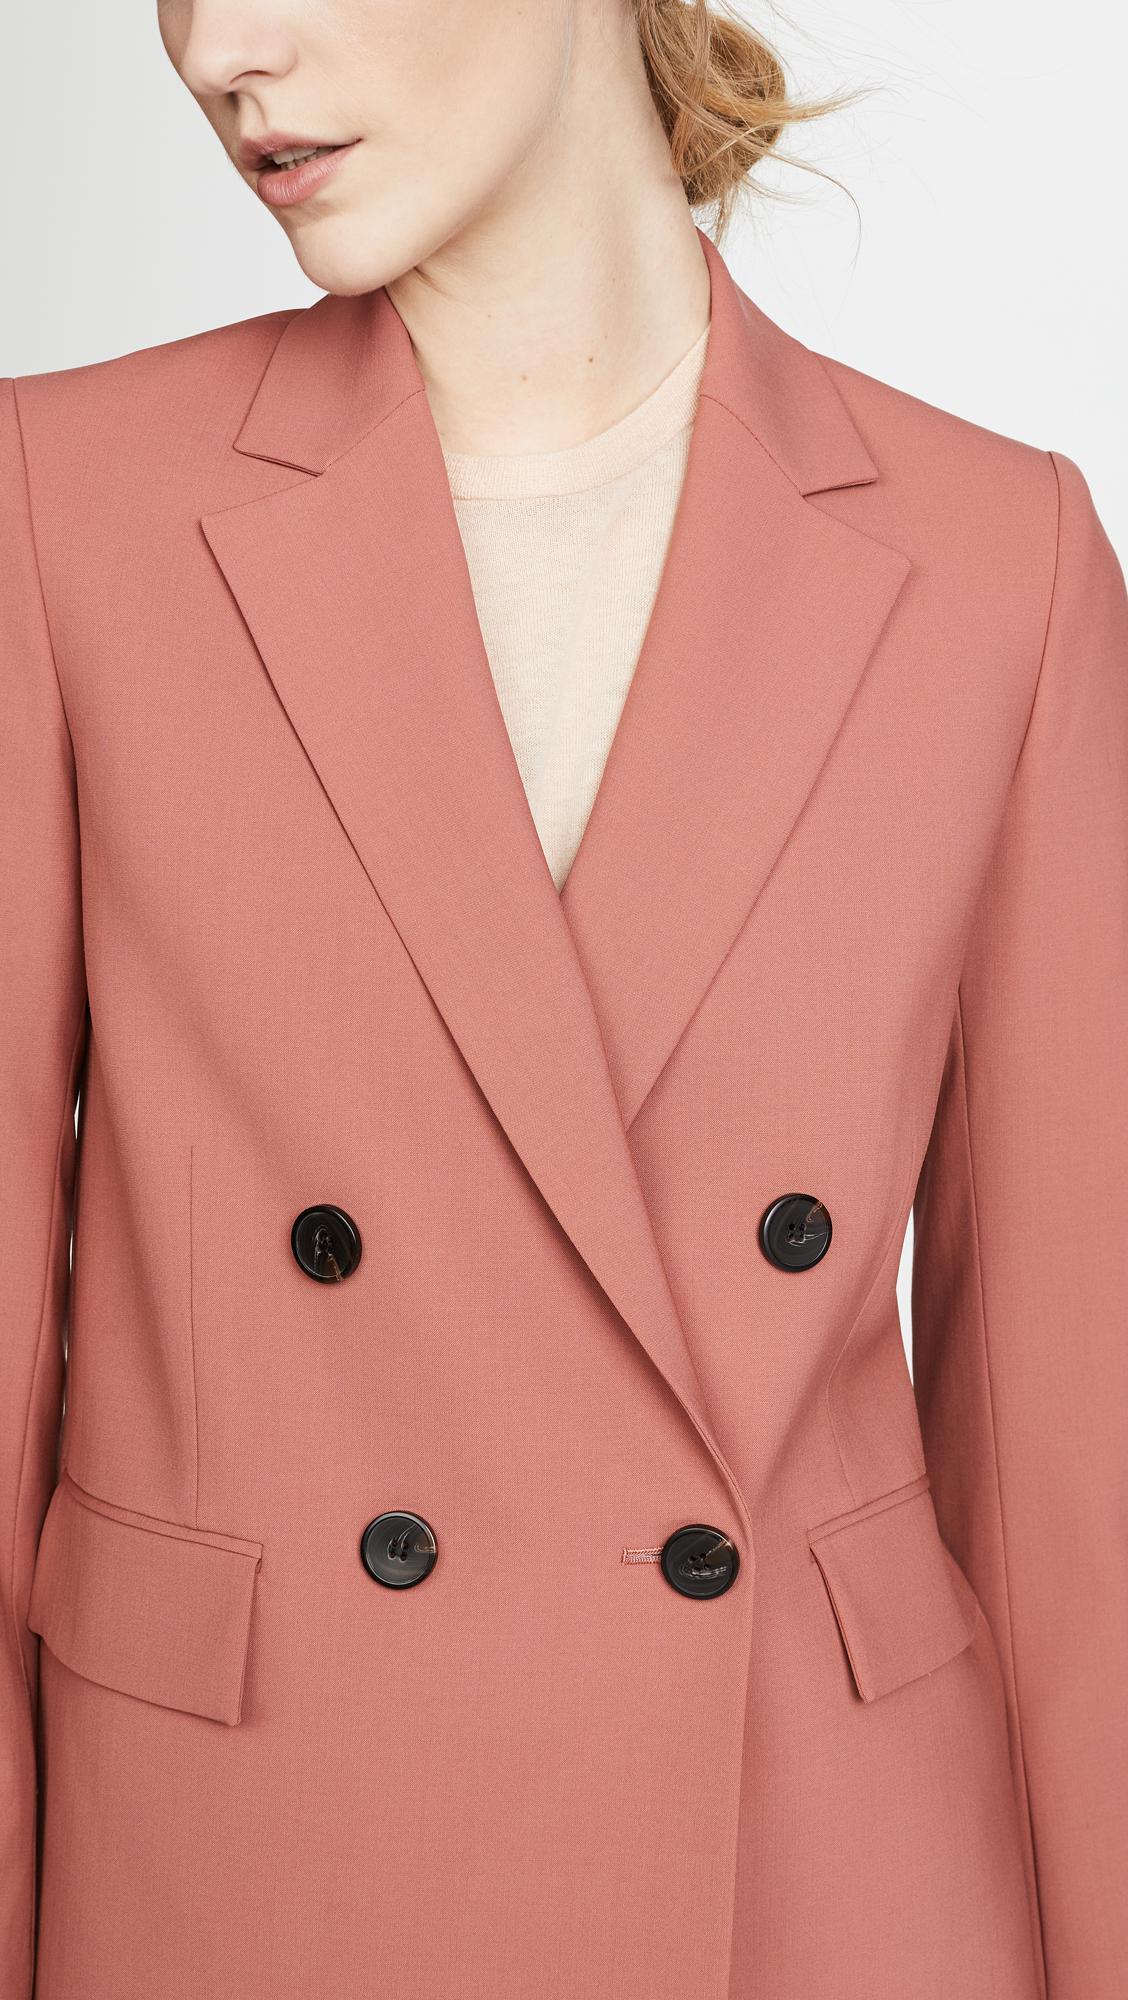 Theory Piazza Jacket in Pink - Lyst